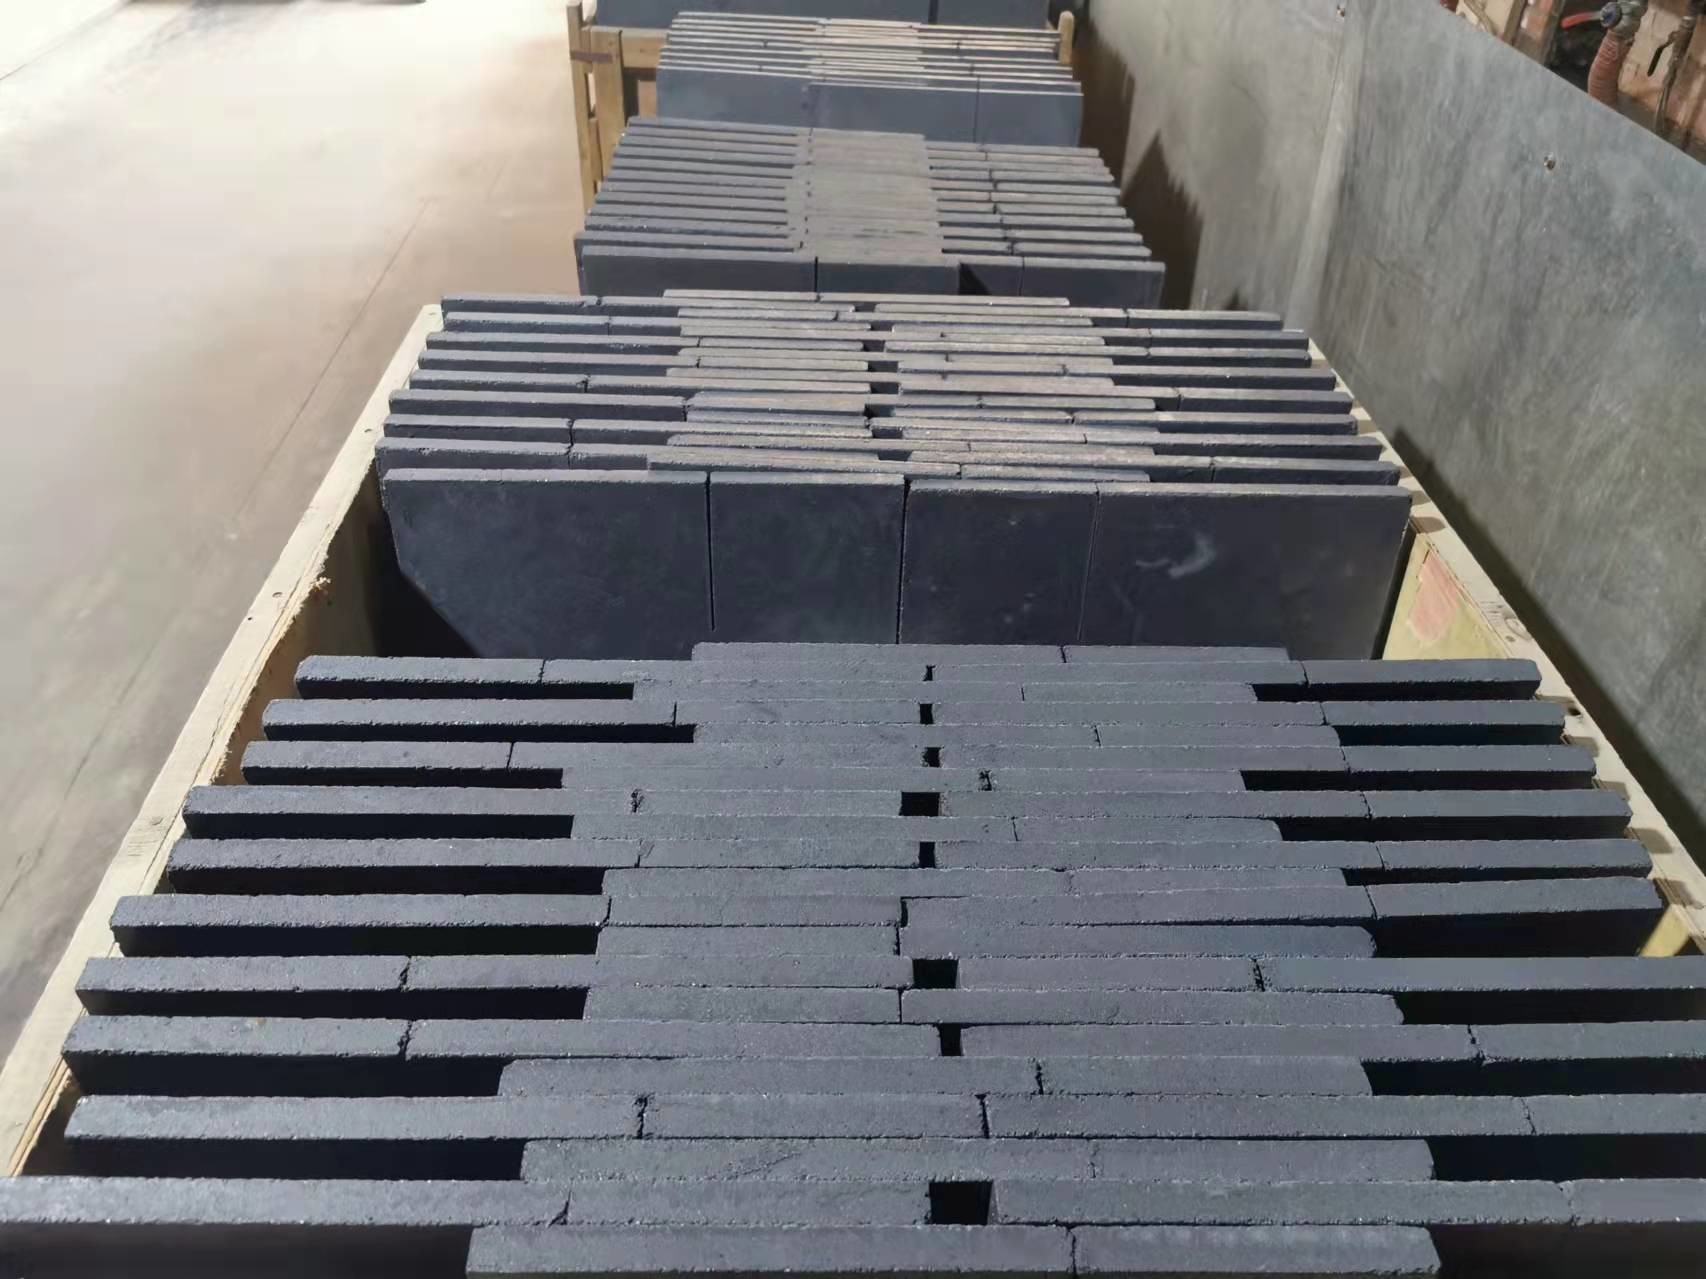 Buy cheap Refractory Silicon Carbide Sic Plate Wear Resistant For Ceramic Firing from wholesalers